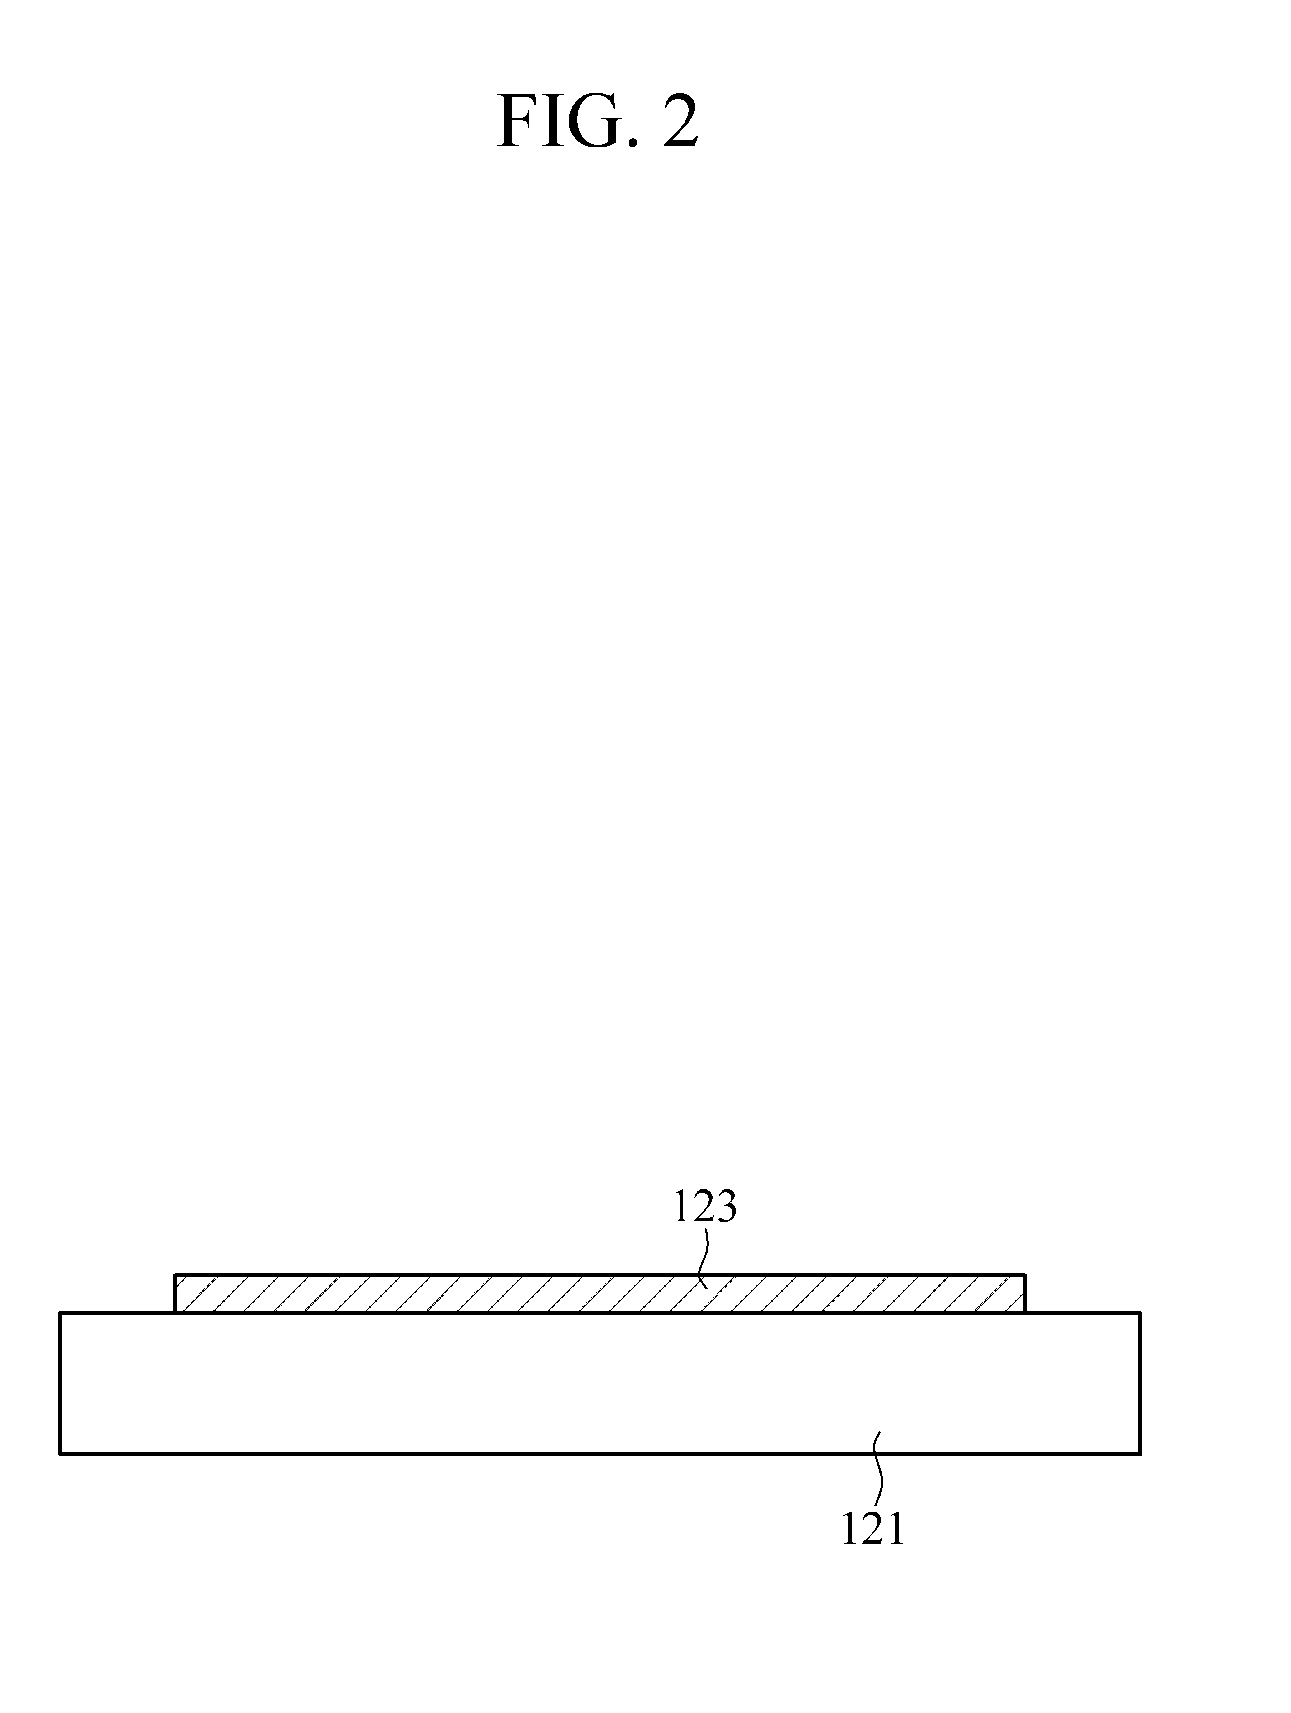 Antenna with superstrate providing high-gain and beam width control